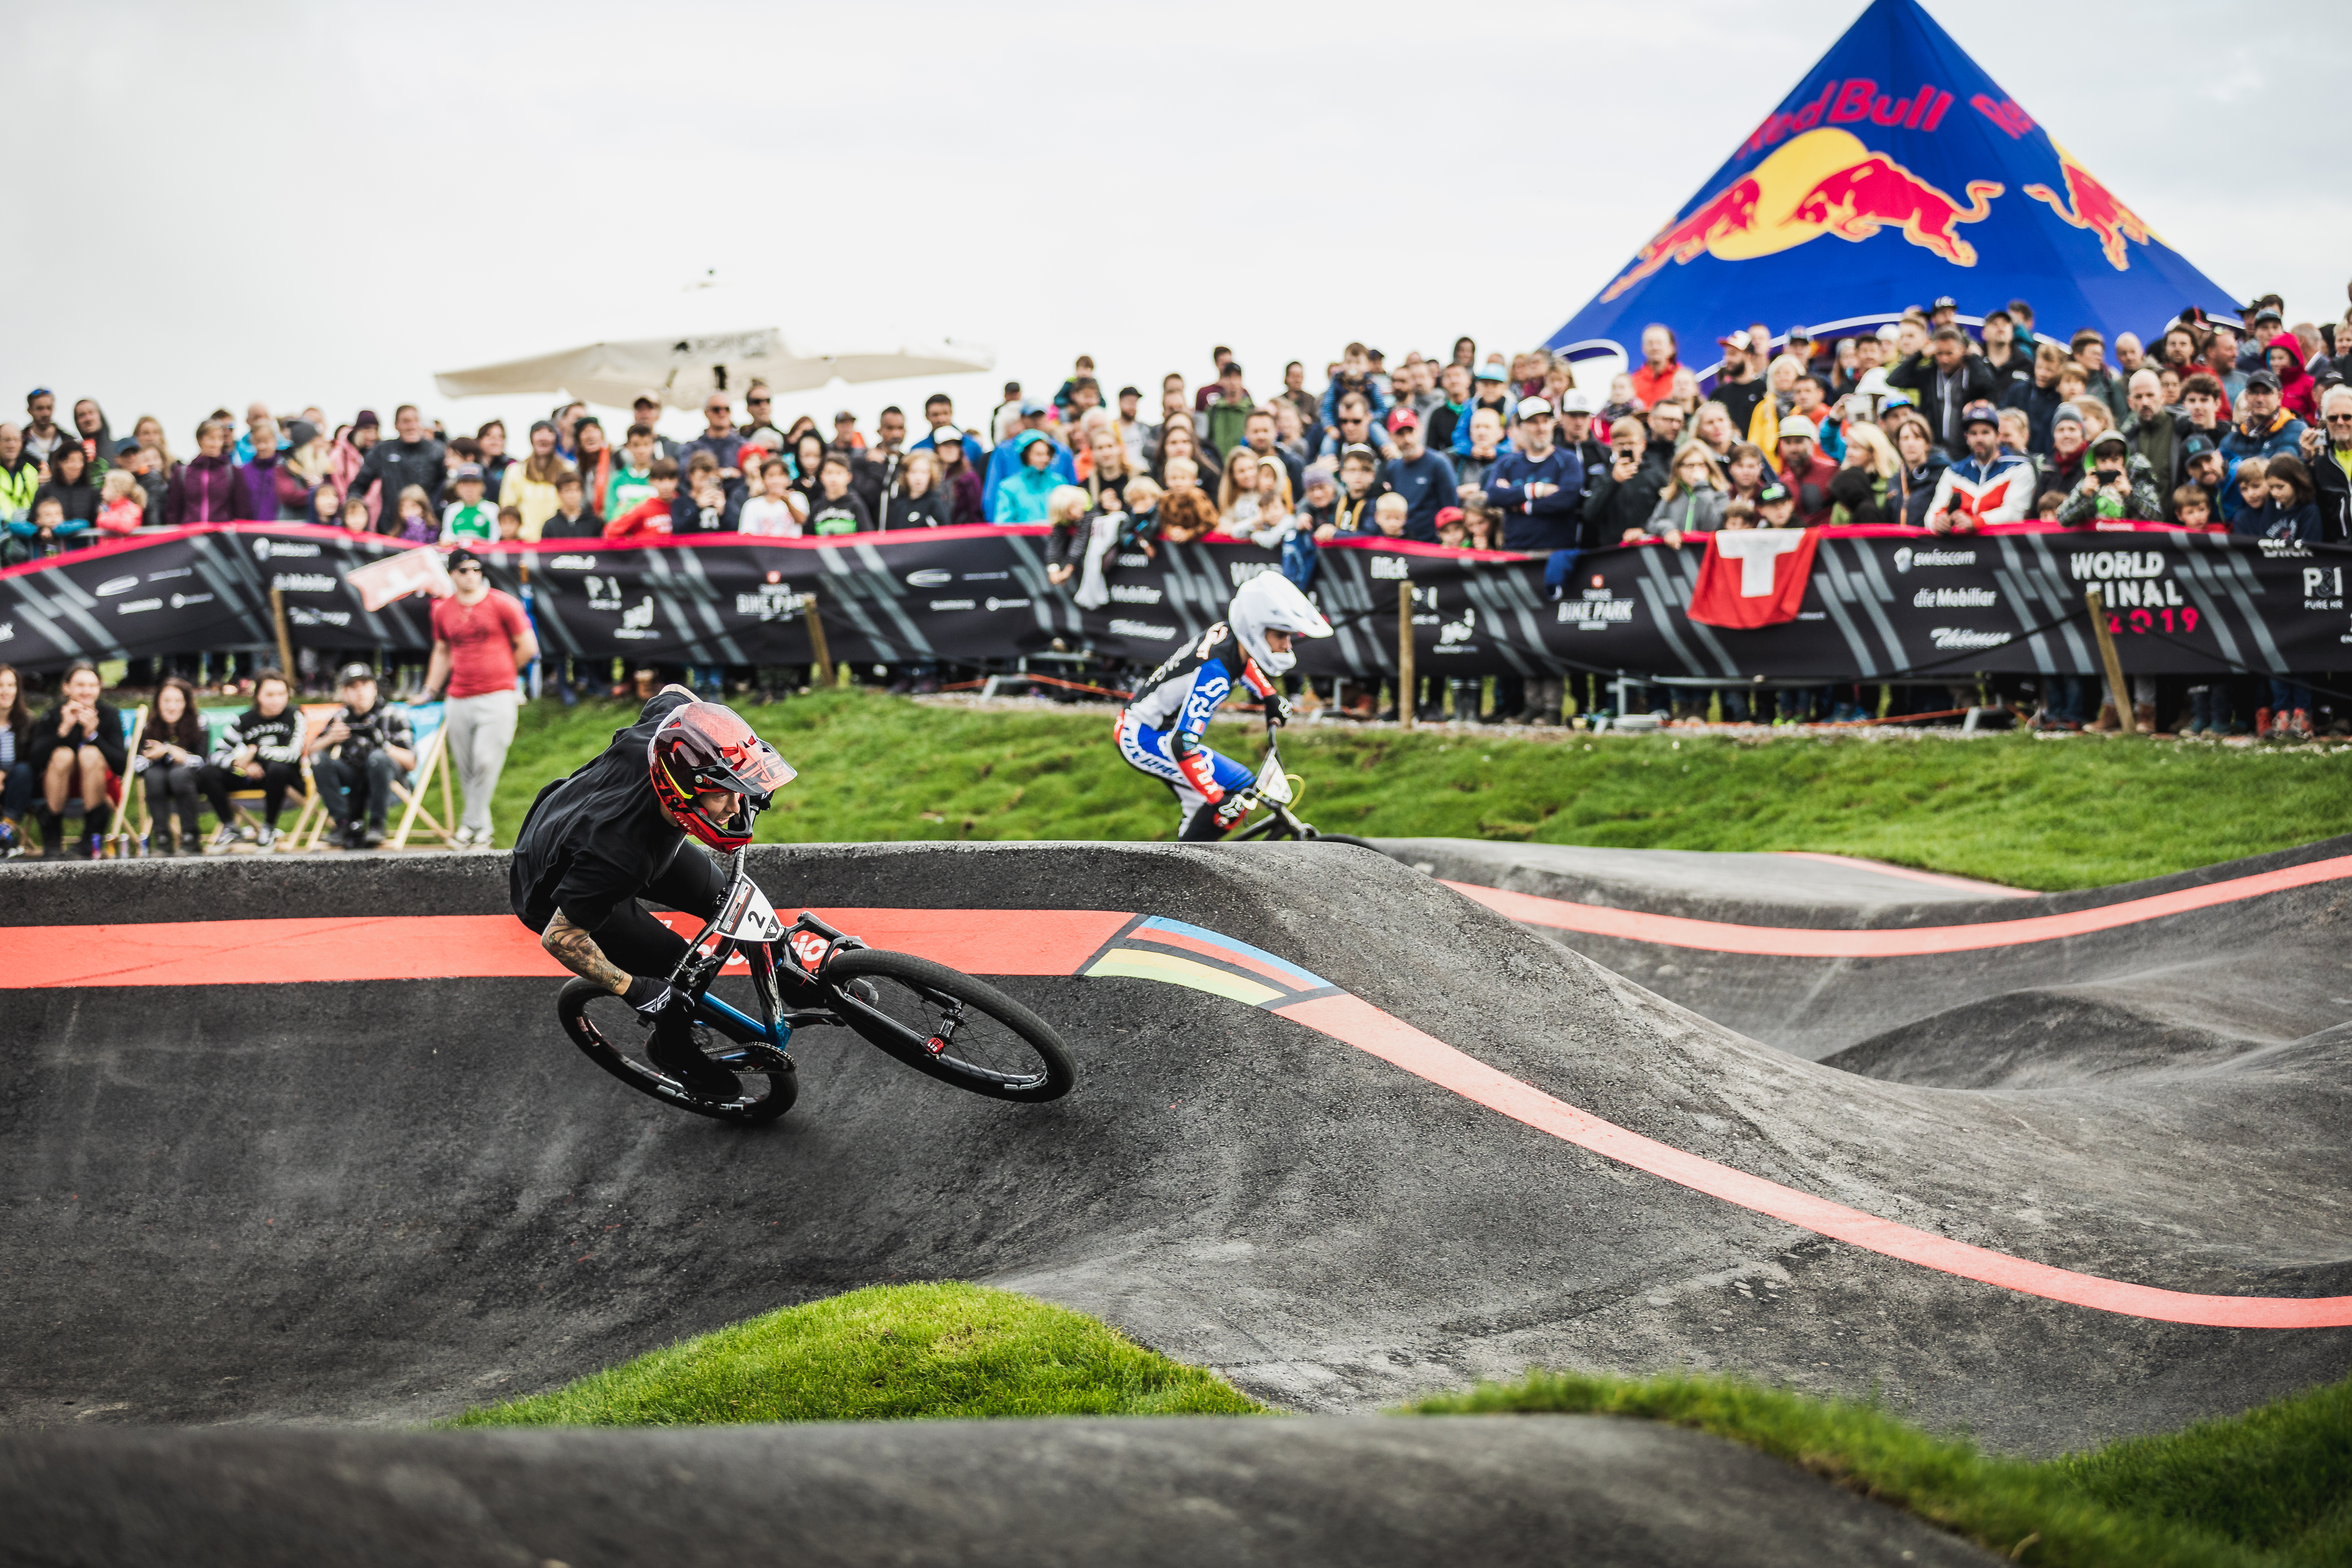 Red Bull UCI Pumptrack WM Fahrer in Action